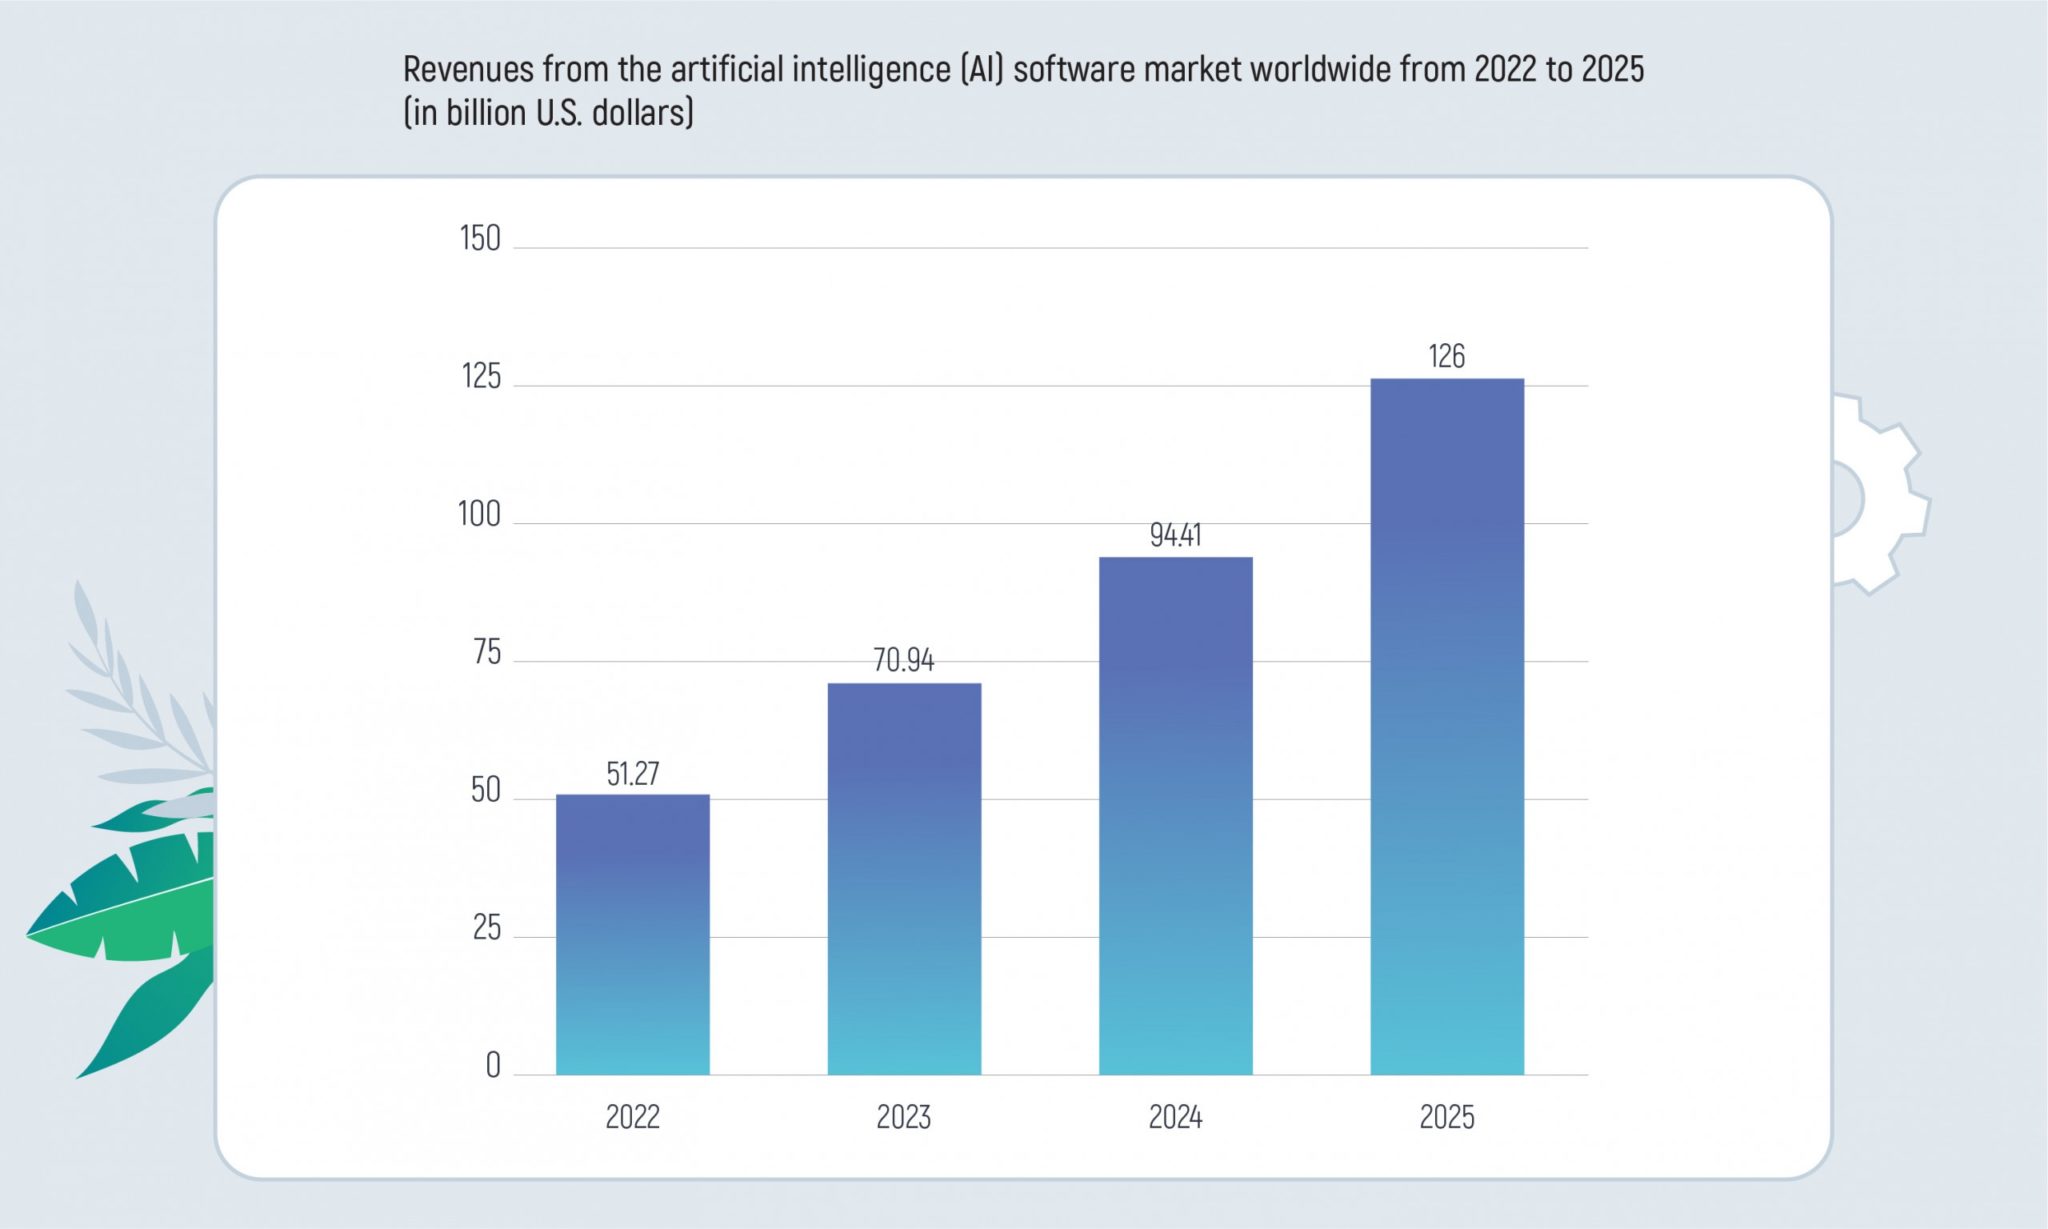 bar chart of revenues from the artificial intelligence (AI) software worldwide from 2022 to 2025 (in billion U.S. dollars)